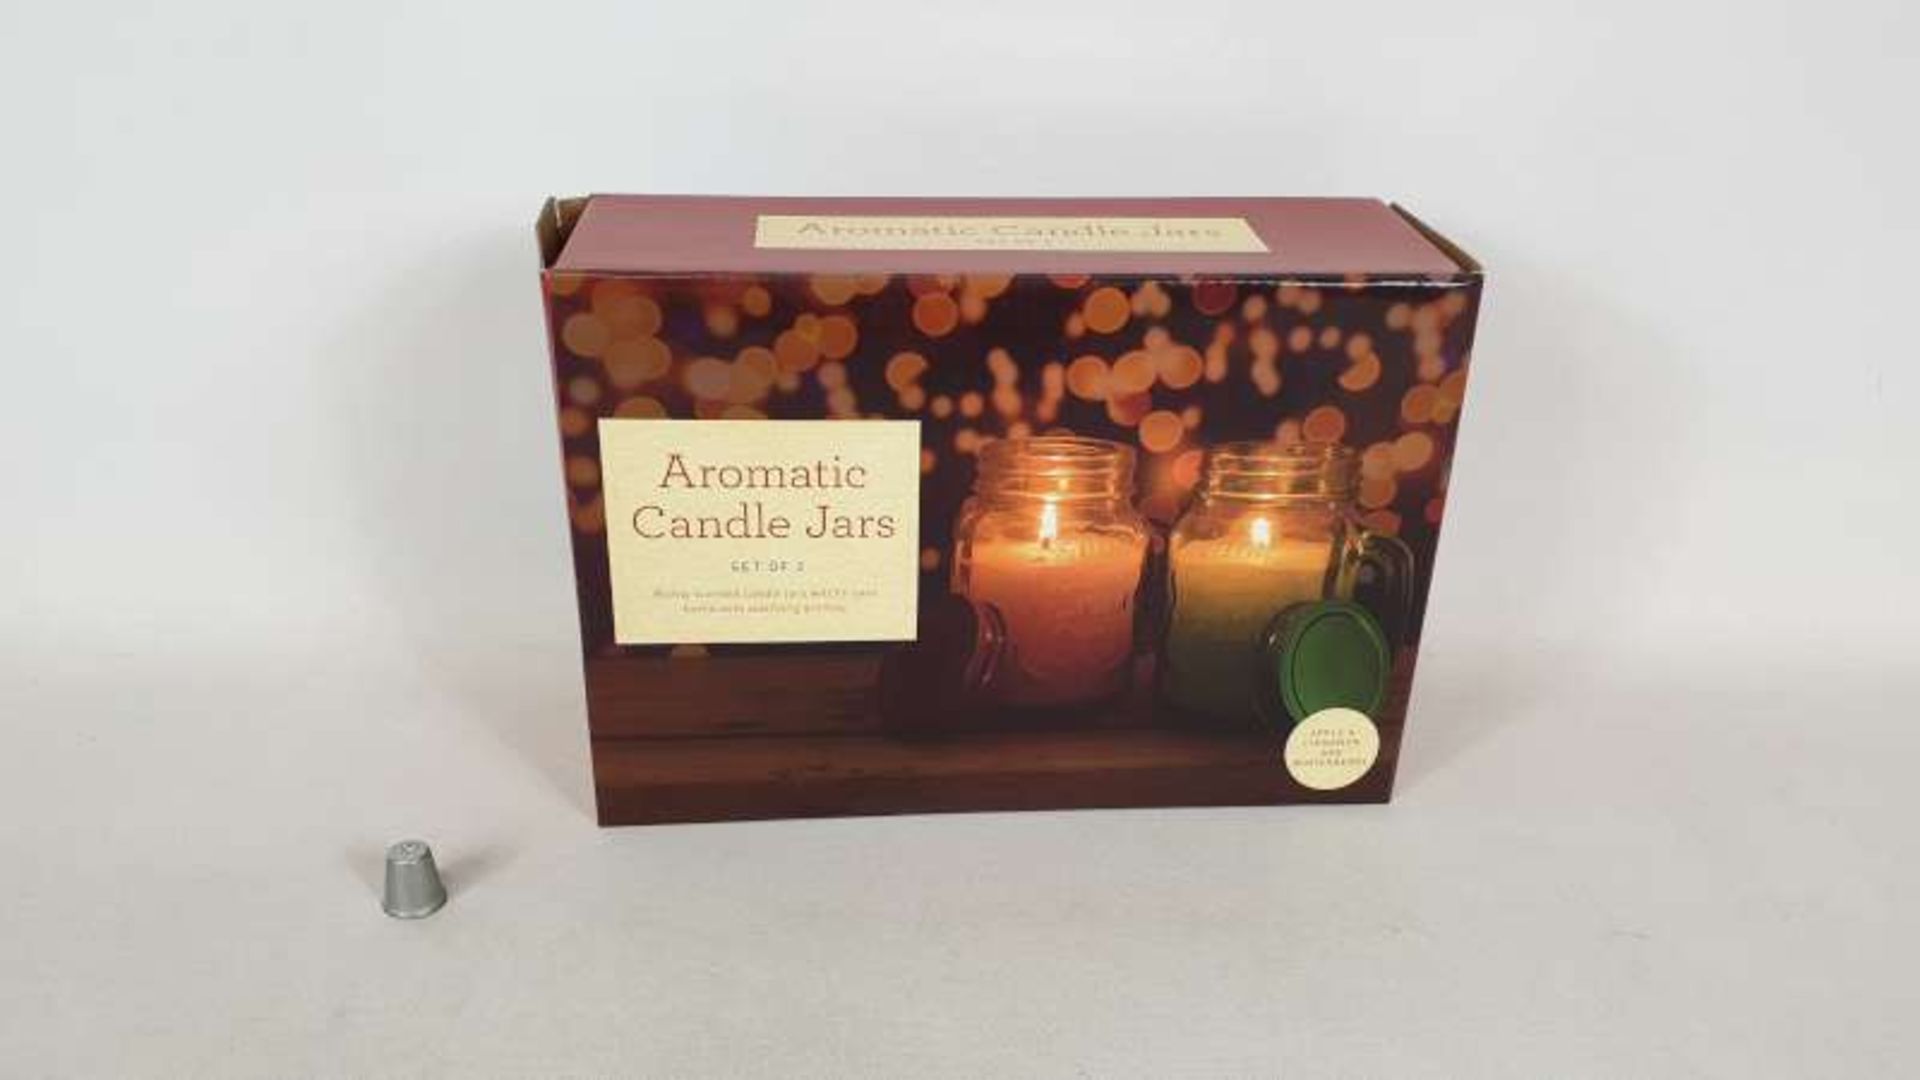 30 X PACKS OF 2 AROMATIC CANDLE JARS IN 6 BOXES